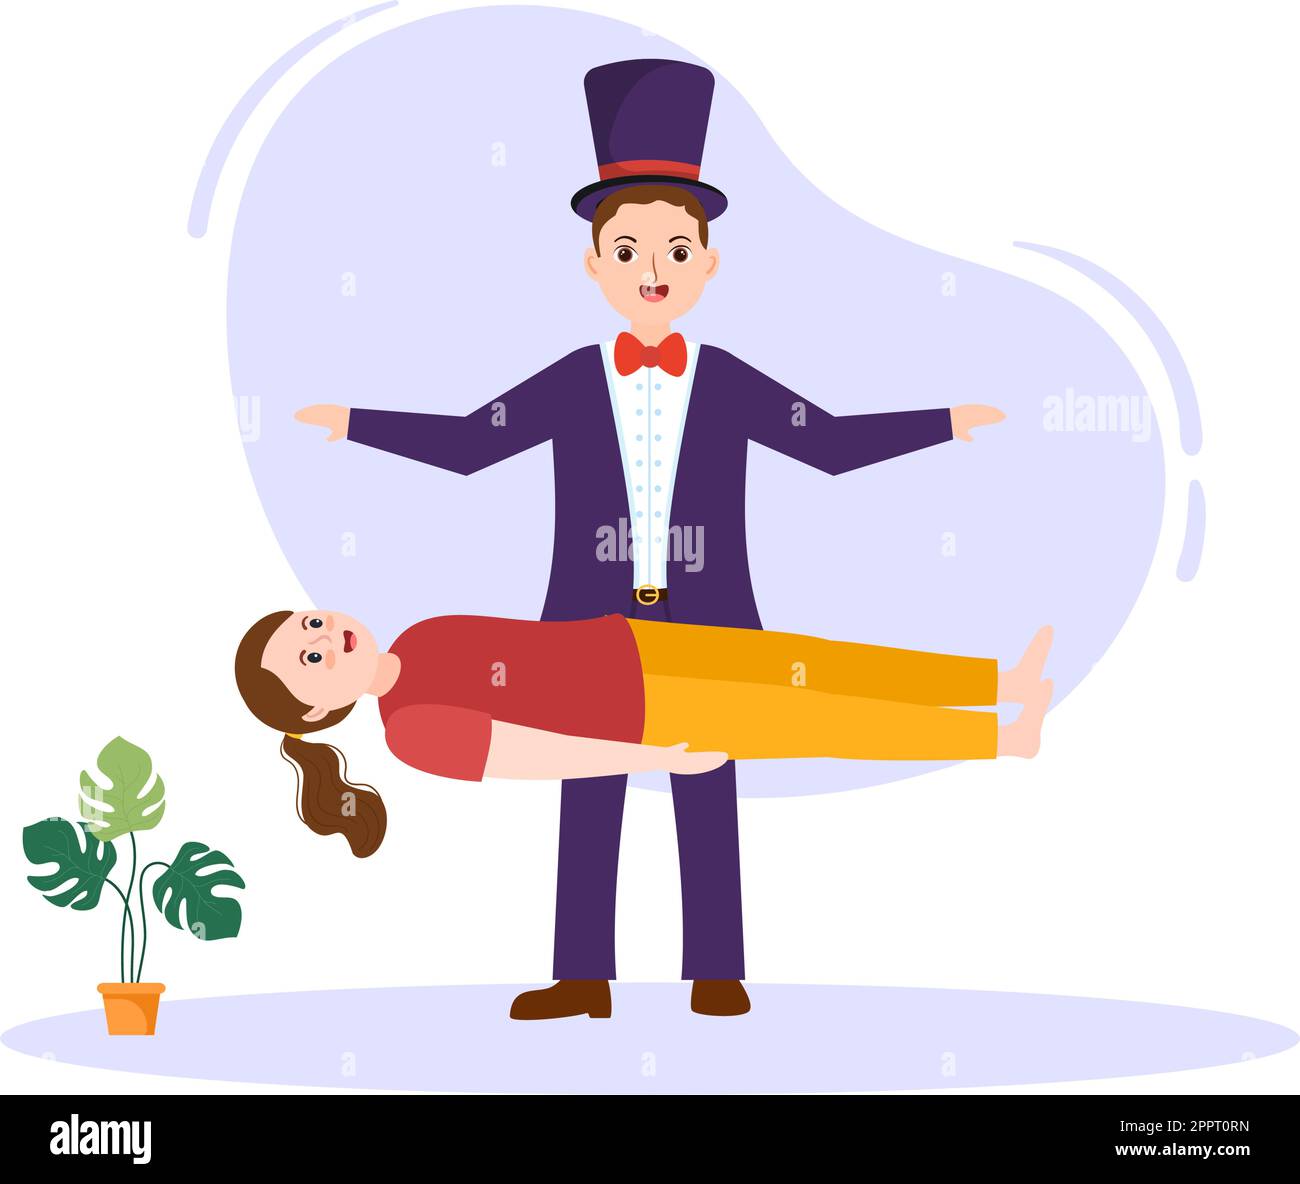 Magician Illusionist Conjuring Tricks and Waving a Magic Wand above his Mysterious Hat on a Stage in Template Hand Drawn Cartoon Flat Illustration Stock Vector